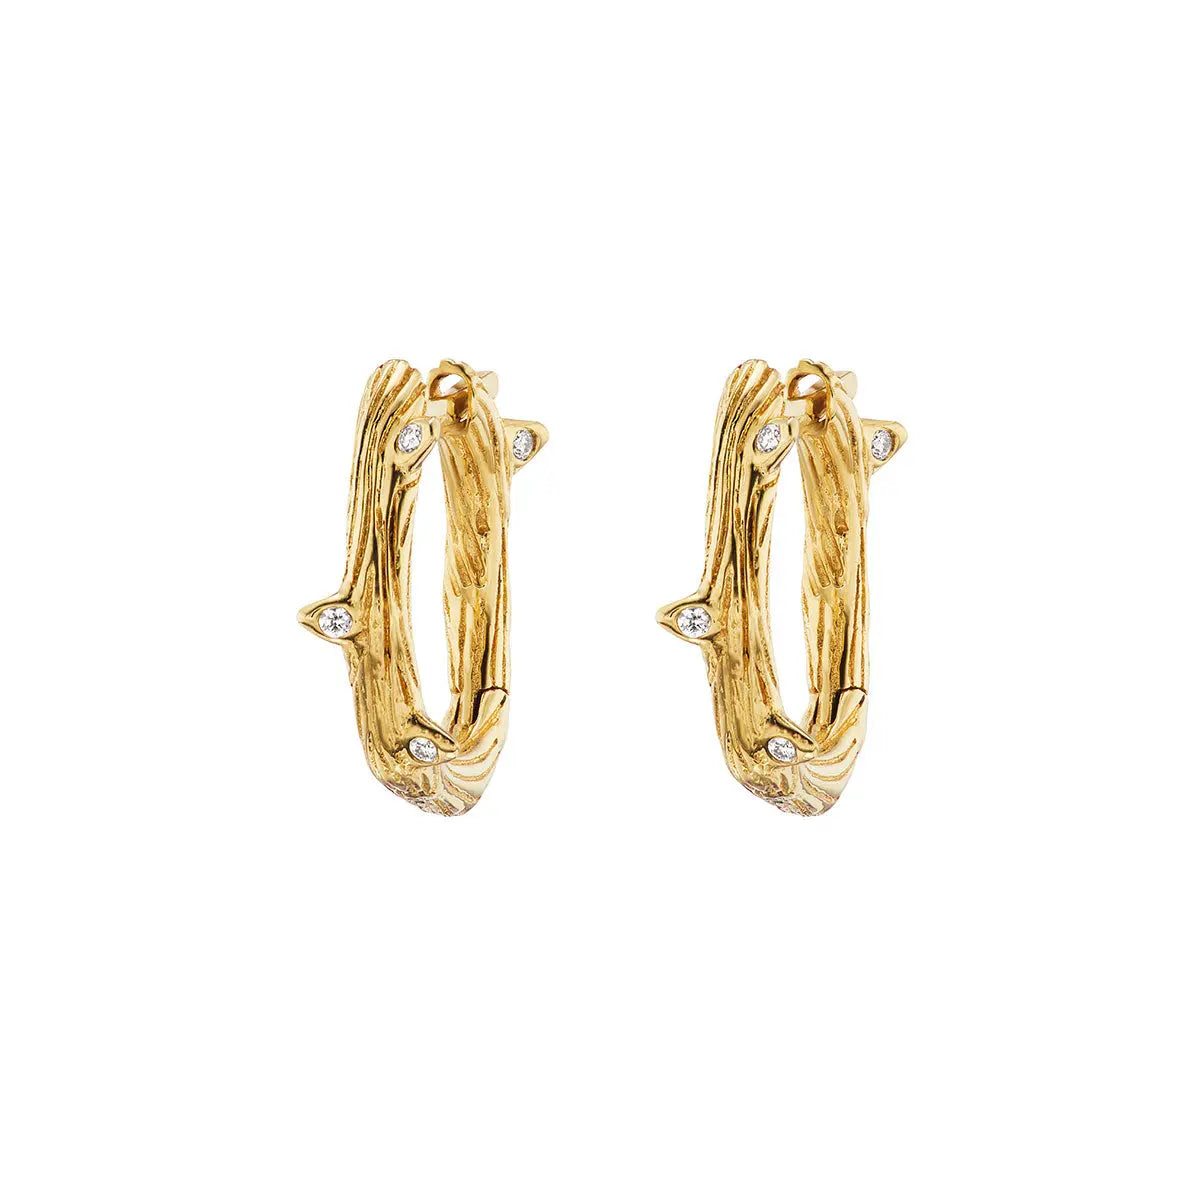 Extra small hinged 18k and diamond earrings for main earring hole or additional holes with just enough edge and bling  Designed by Feral Jewelry